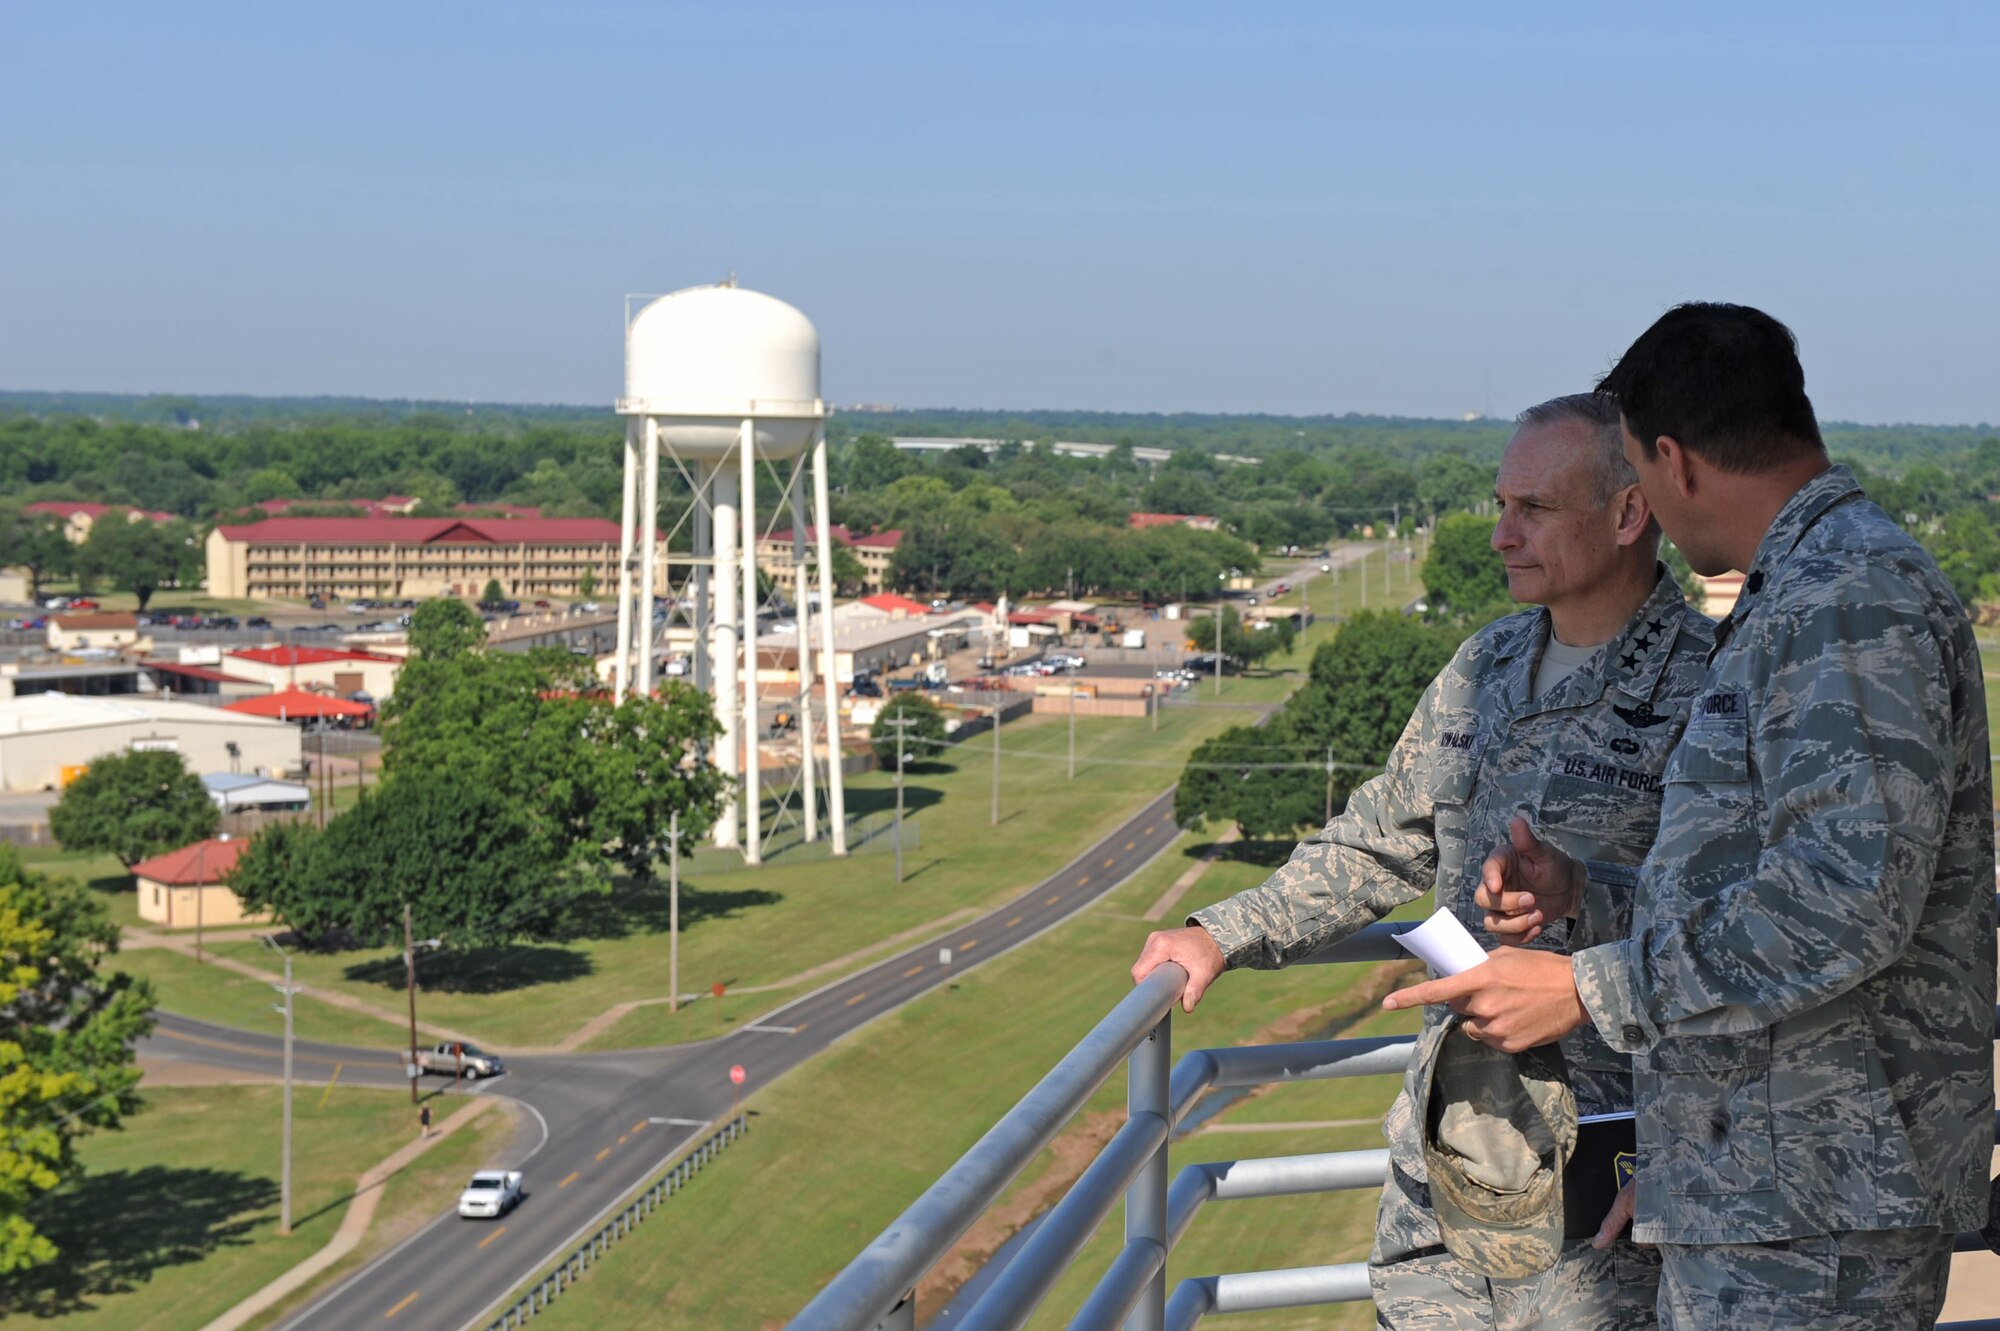 Lt. Col. David Chisenhall, 2nd Mission Support Group deputy commander, escorts Lt. Gen. James Kowalski, Air Force Global Strike Command commander, around the air traffic control tower catwalk at Barksdale Air Force Base, La., May 17. Colonel Chisenhall explained how ongoing military construction projects at Barksdale have improved Airman morale and welfare. (U.S. Air Force photo/Airman 1st Class Micaiah Anthony)(RELEASED)